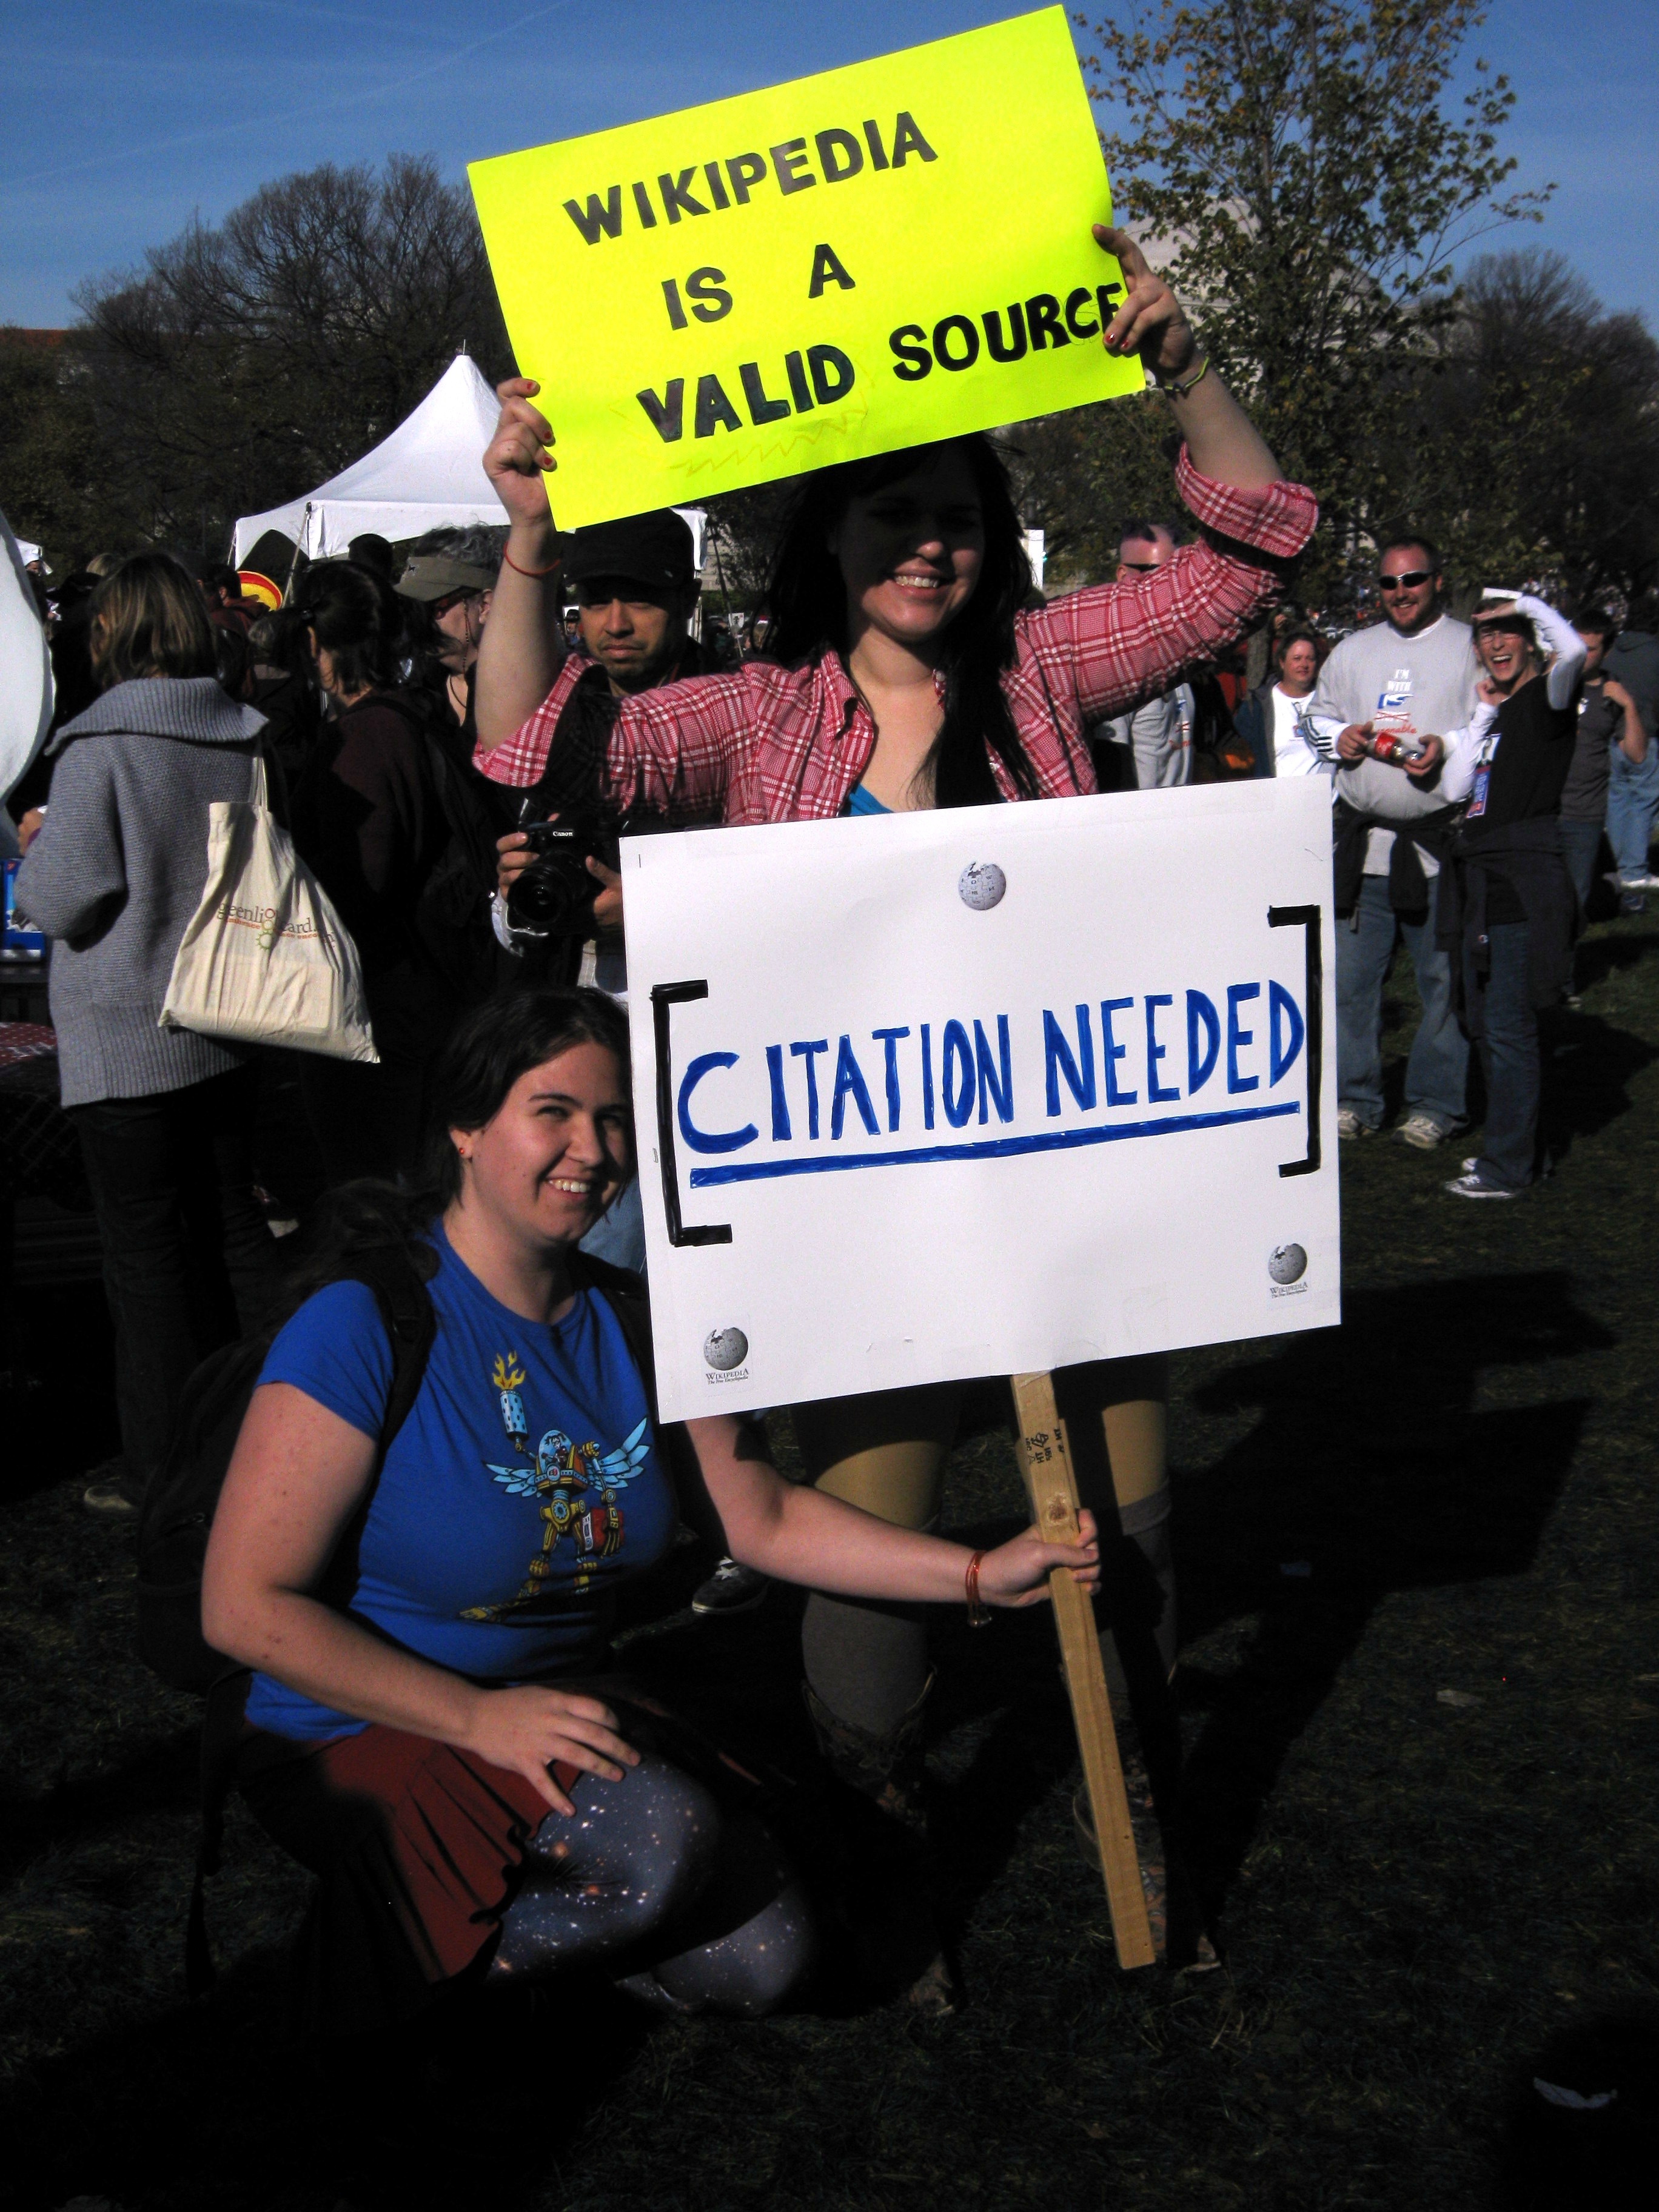  Two participants of the "Rally to Restore Sanity and/or Fear" in Washington D.C. (USA), holding signs saying "Wikipedia is a valid source" and "citation needed." Photo by Kat Walsh (Wikipedia User: Mindspillage), October 30, 2010, CC-BY-SA 3.0.